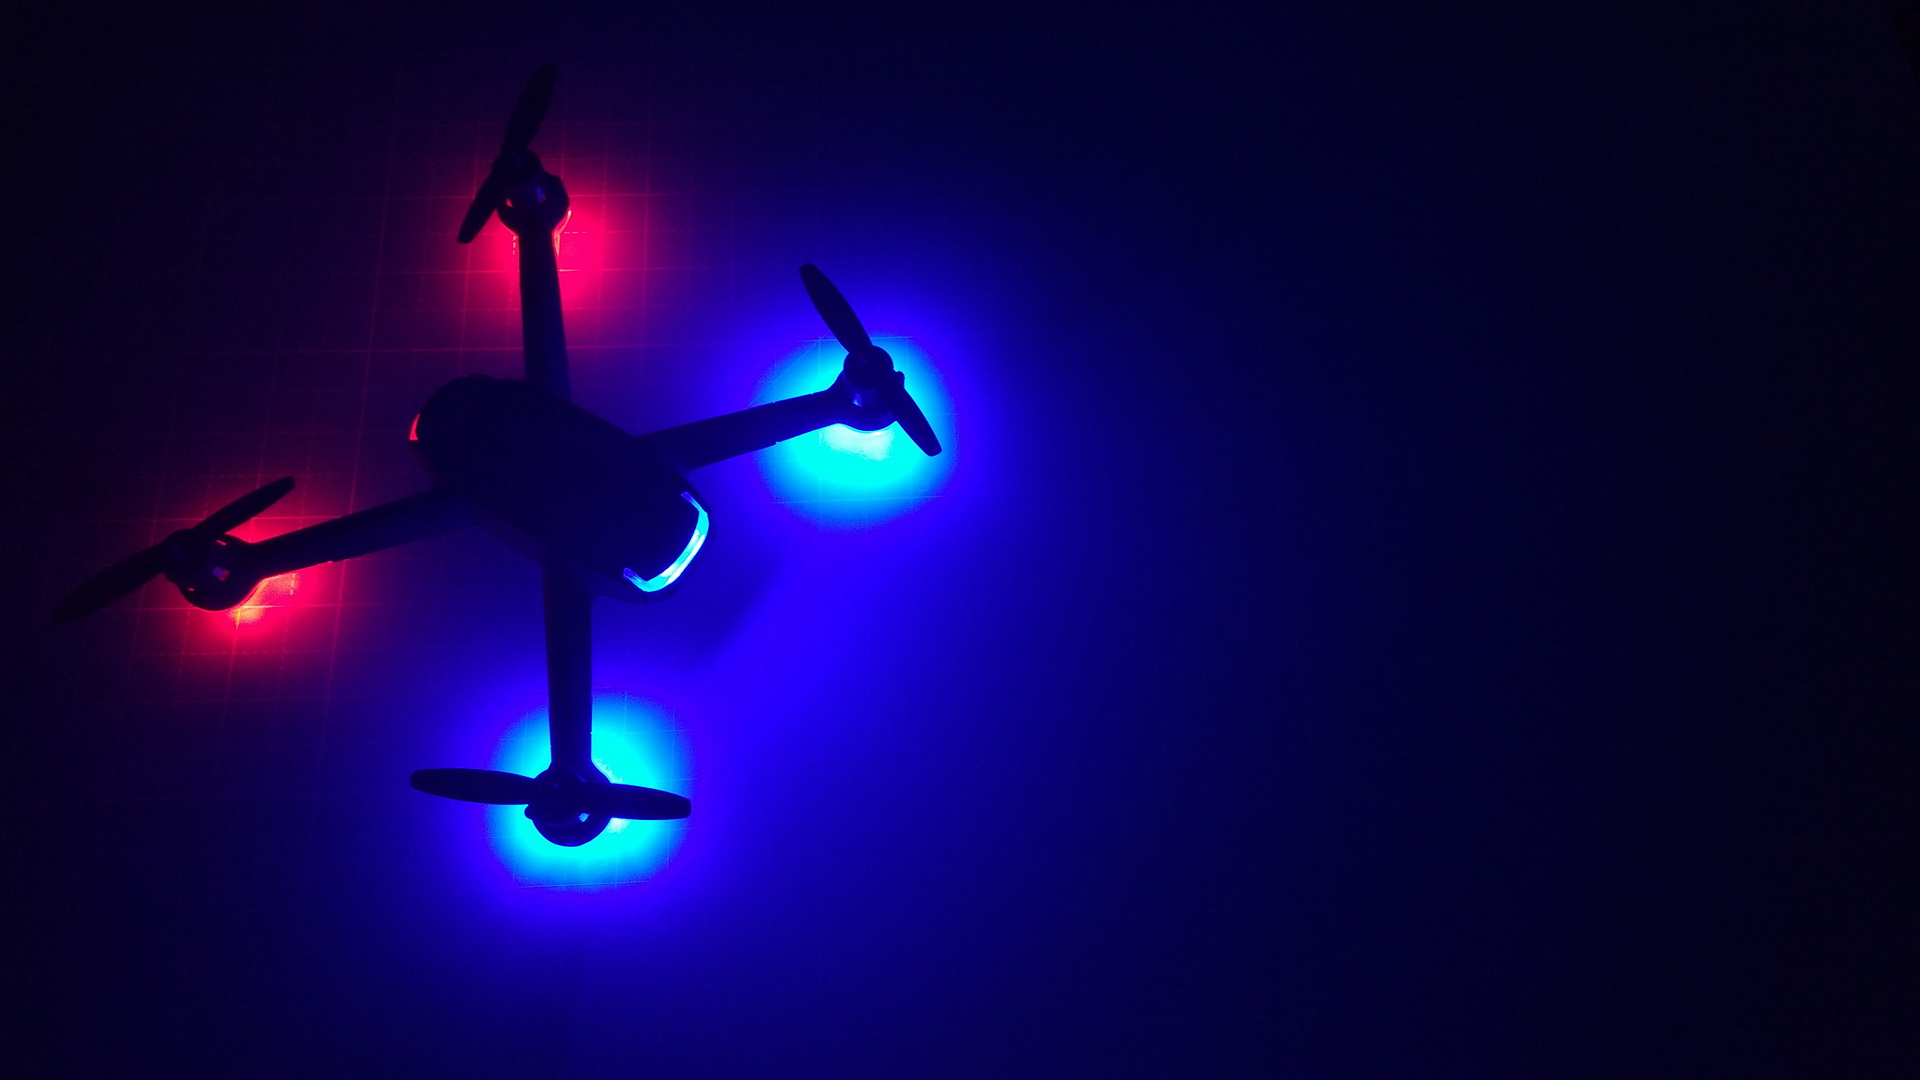 I Thought This Photo Of A Quadcopter Drone Looked Pretty - Light , HD Wallpaper & Backgrounds